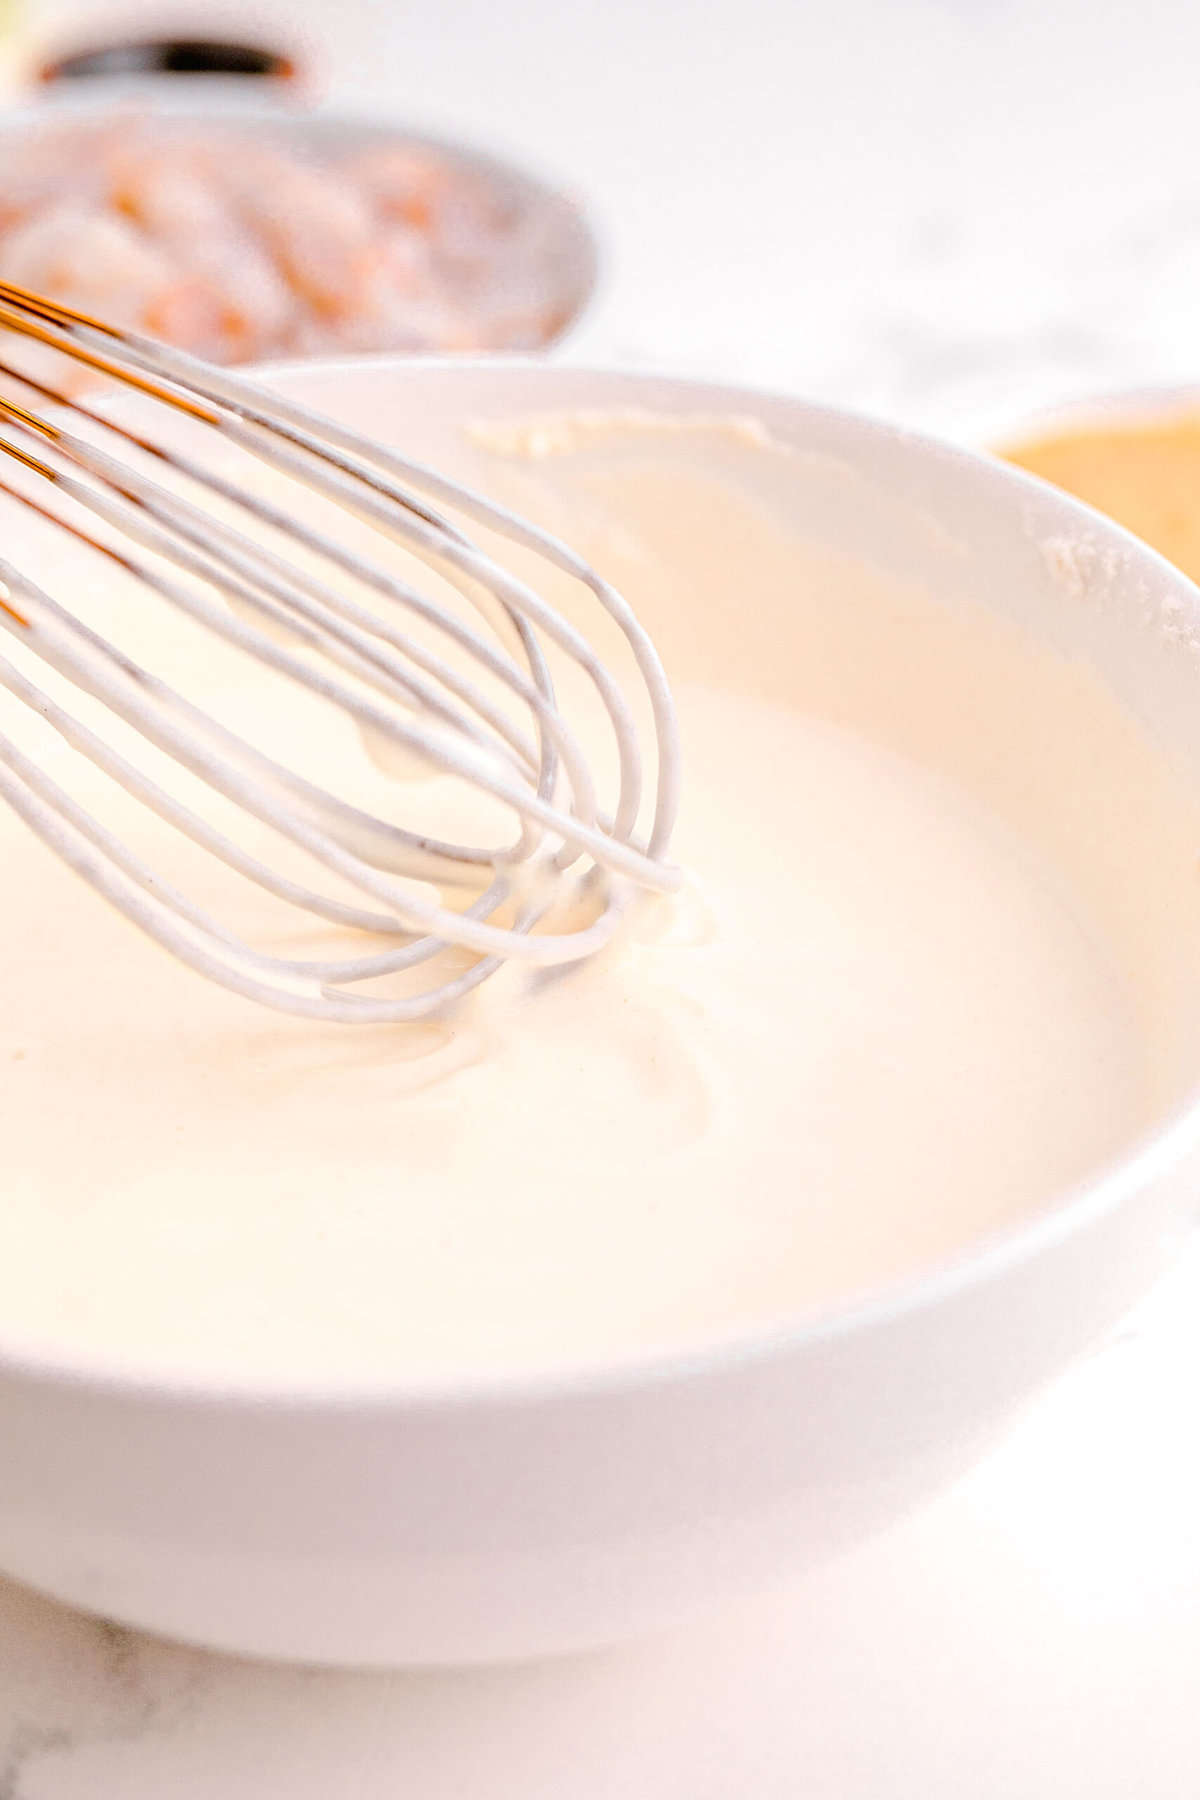 buttermilk, cornstarch, and flour mixture being whisked together in a white bowl